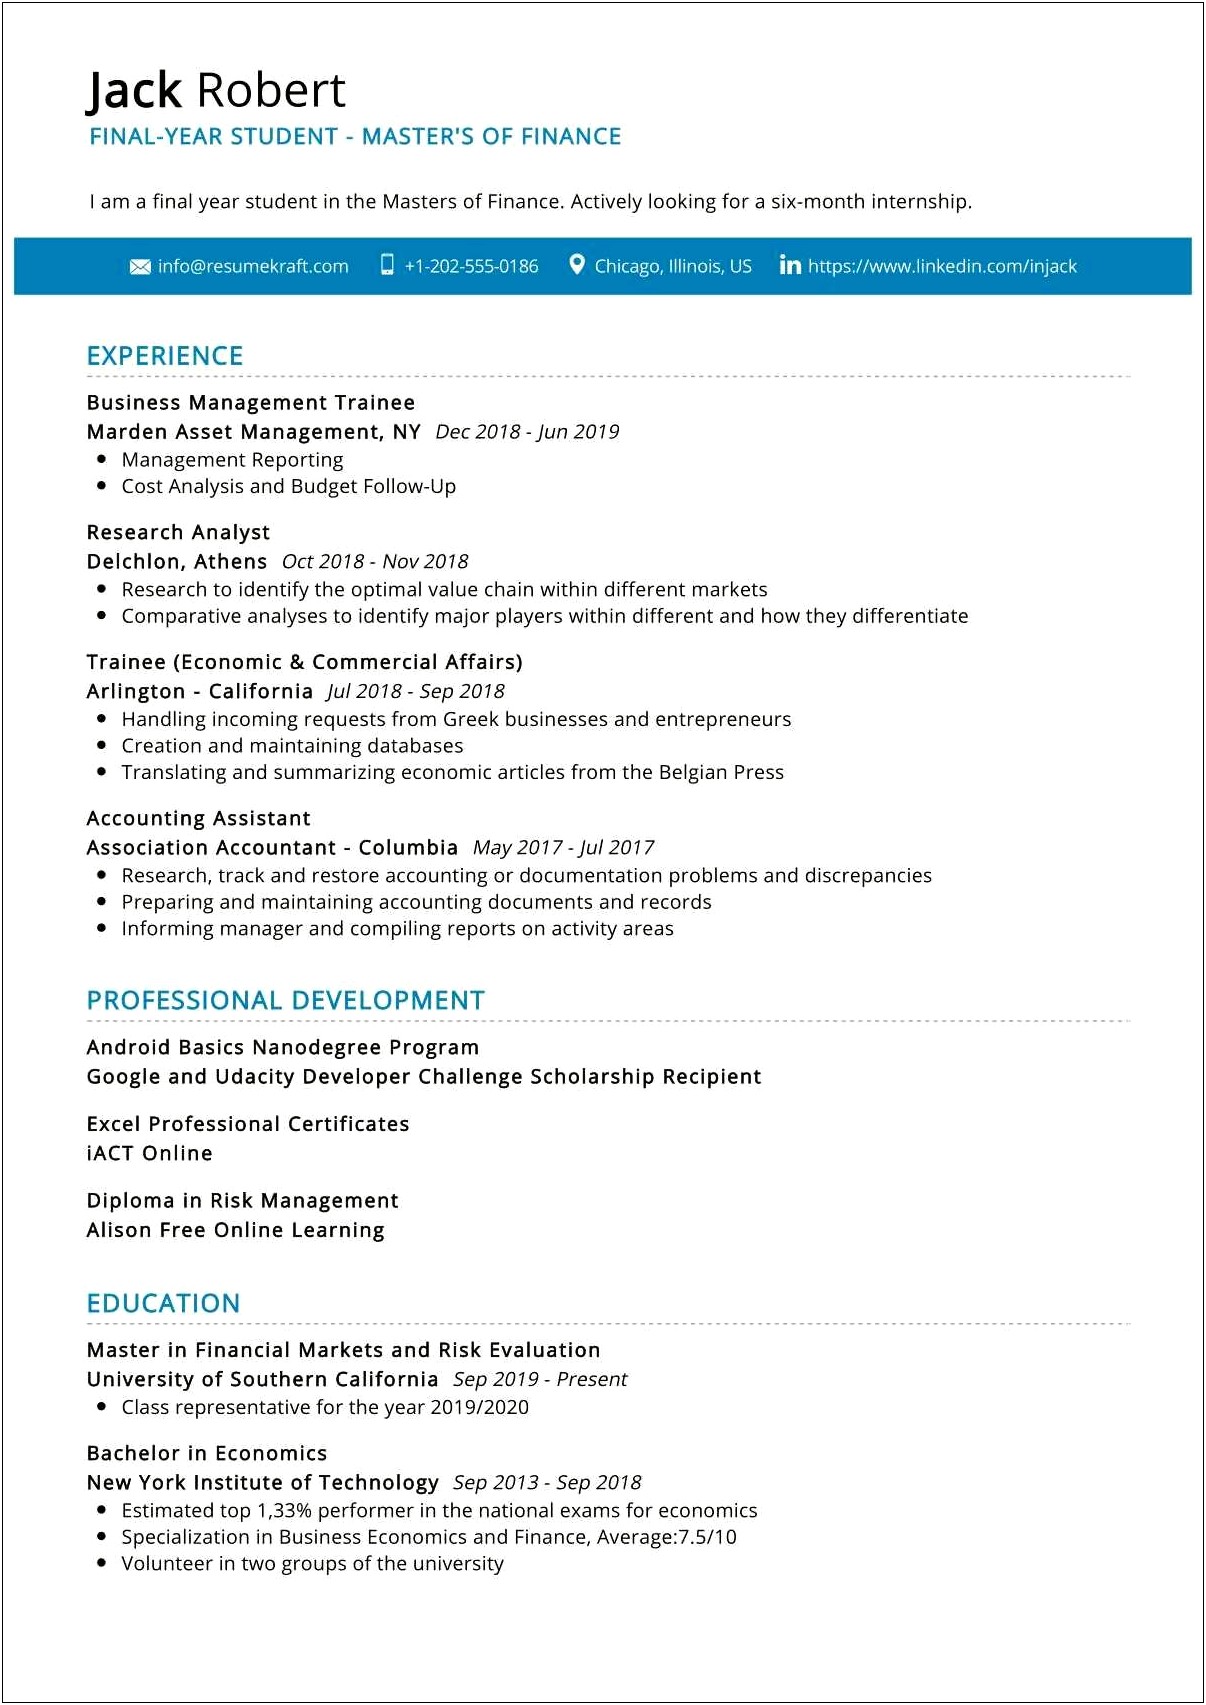 Resume Qualifications Summary For College Students